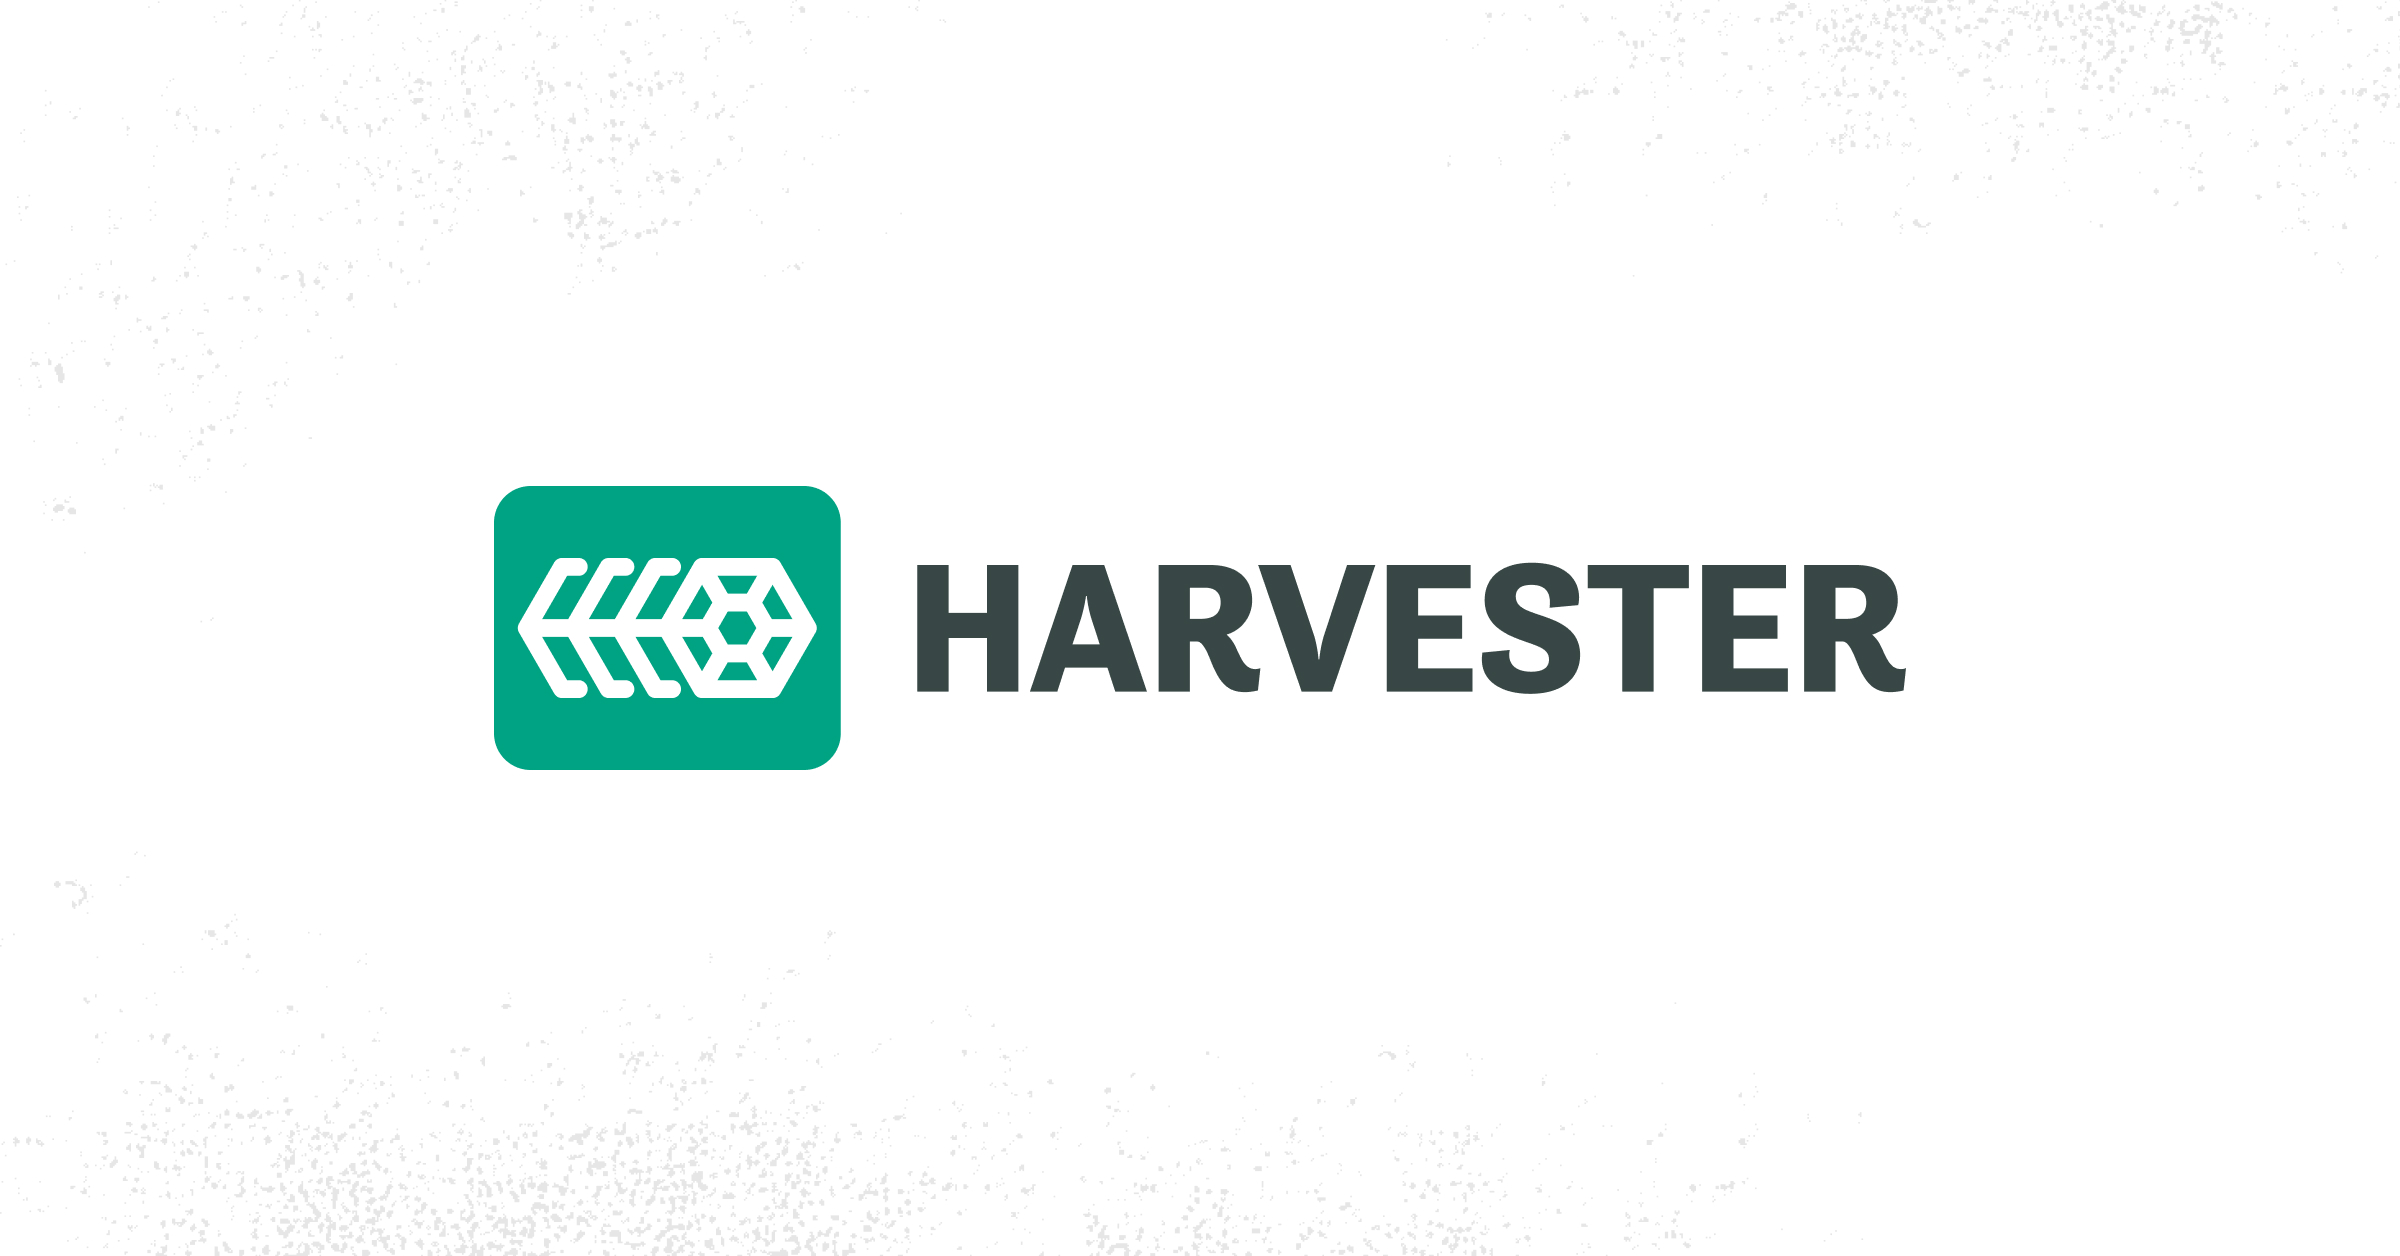 SUSE Harvester